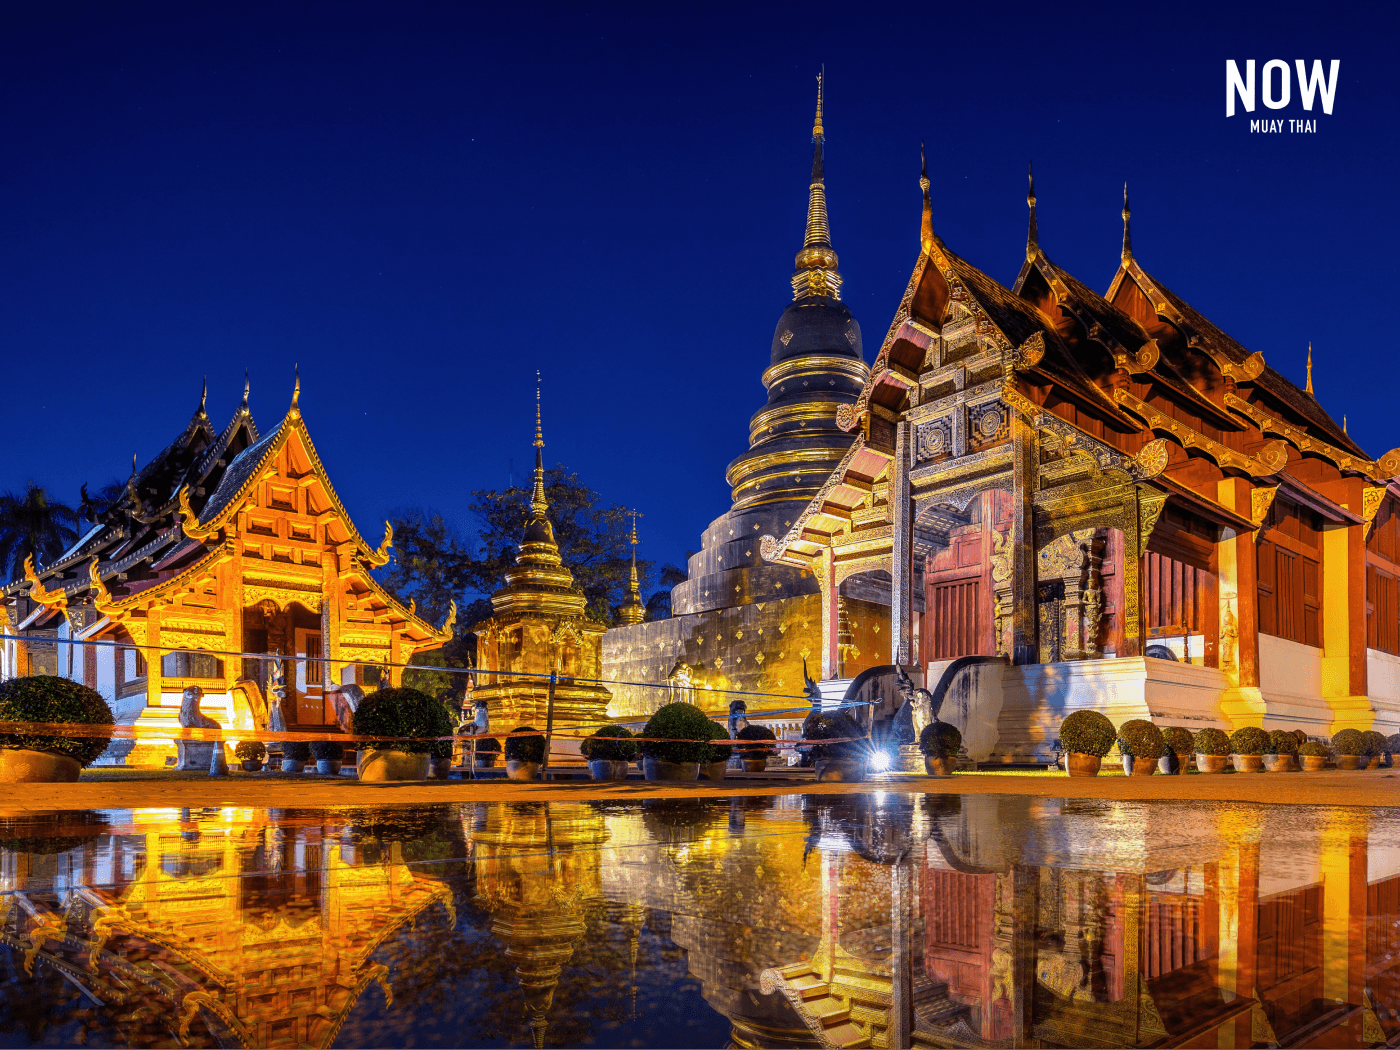 The Wat Phra Singh Temple in Chiang Mai, Thailand, lit up at night